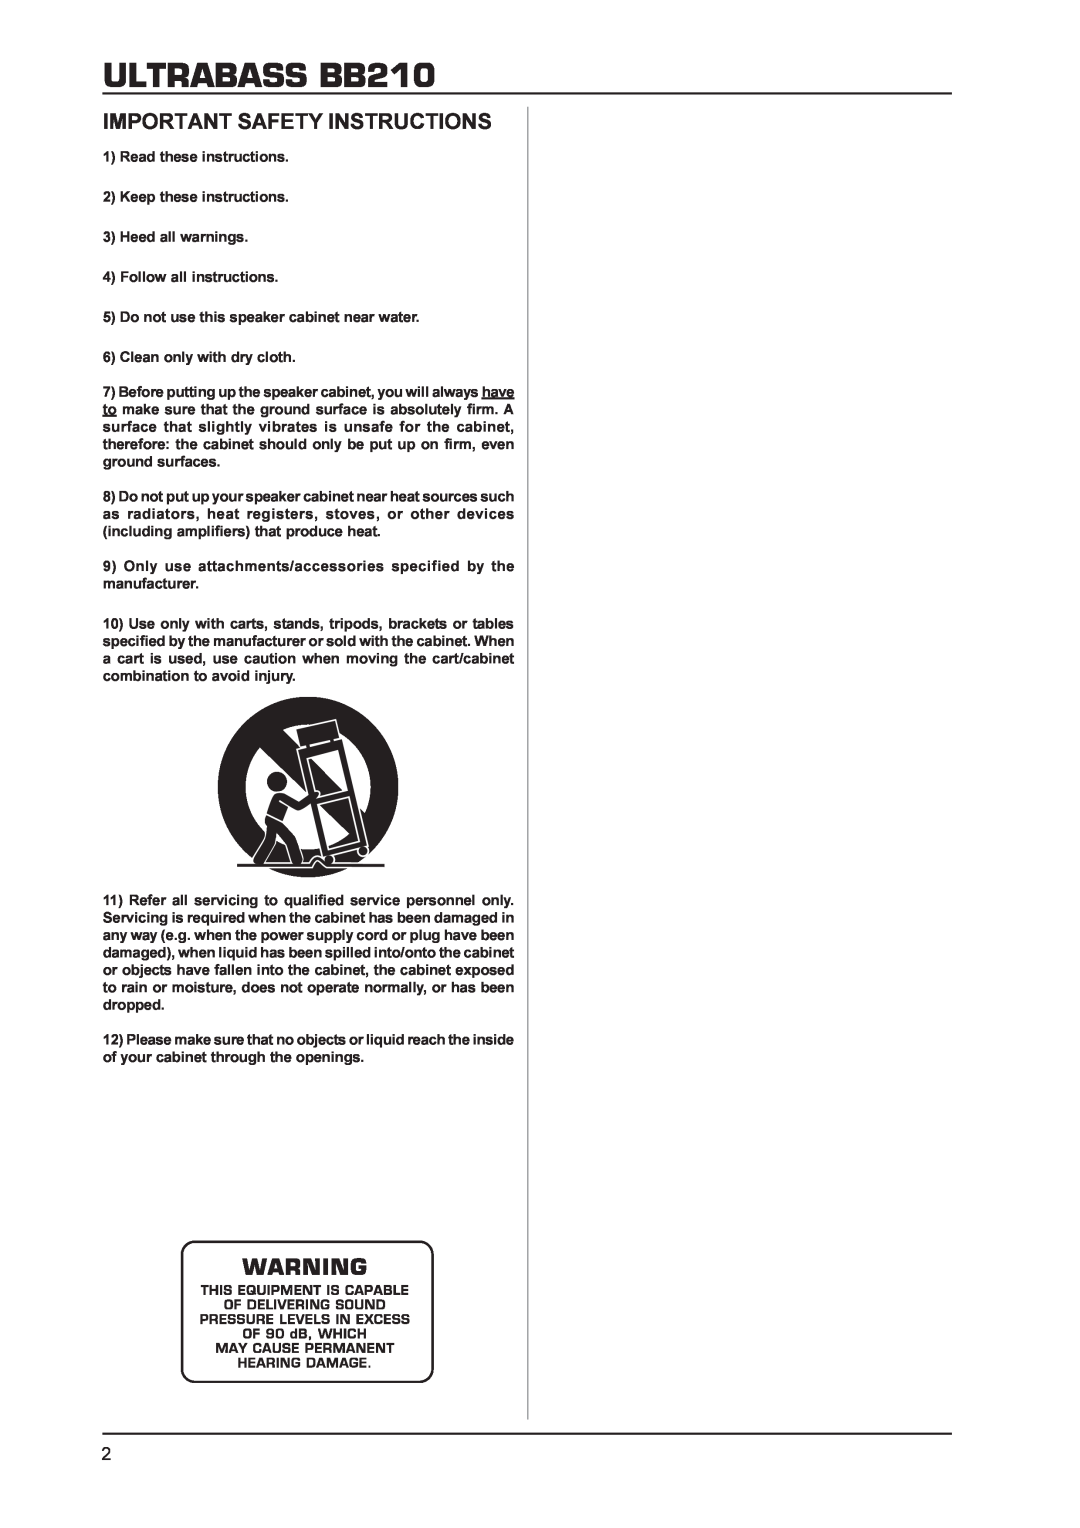 Behringer manual ULTRABASS BB210, Important Safety Instructions 